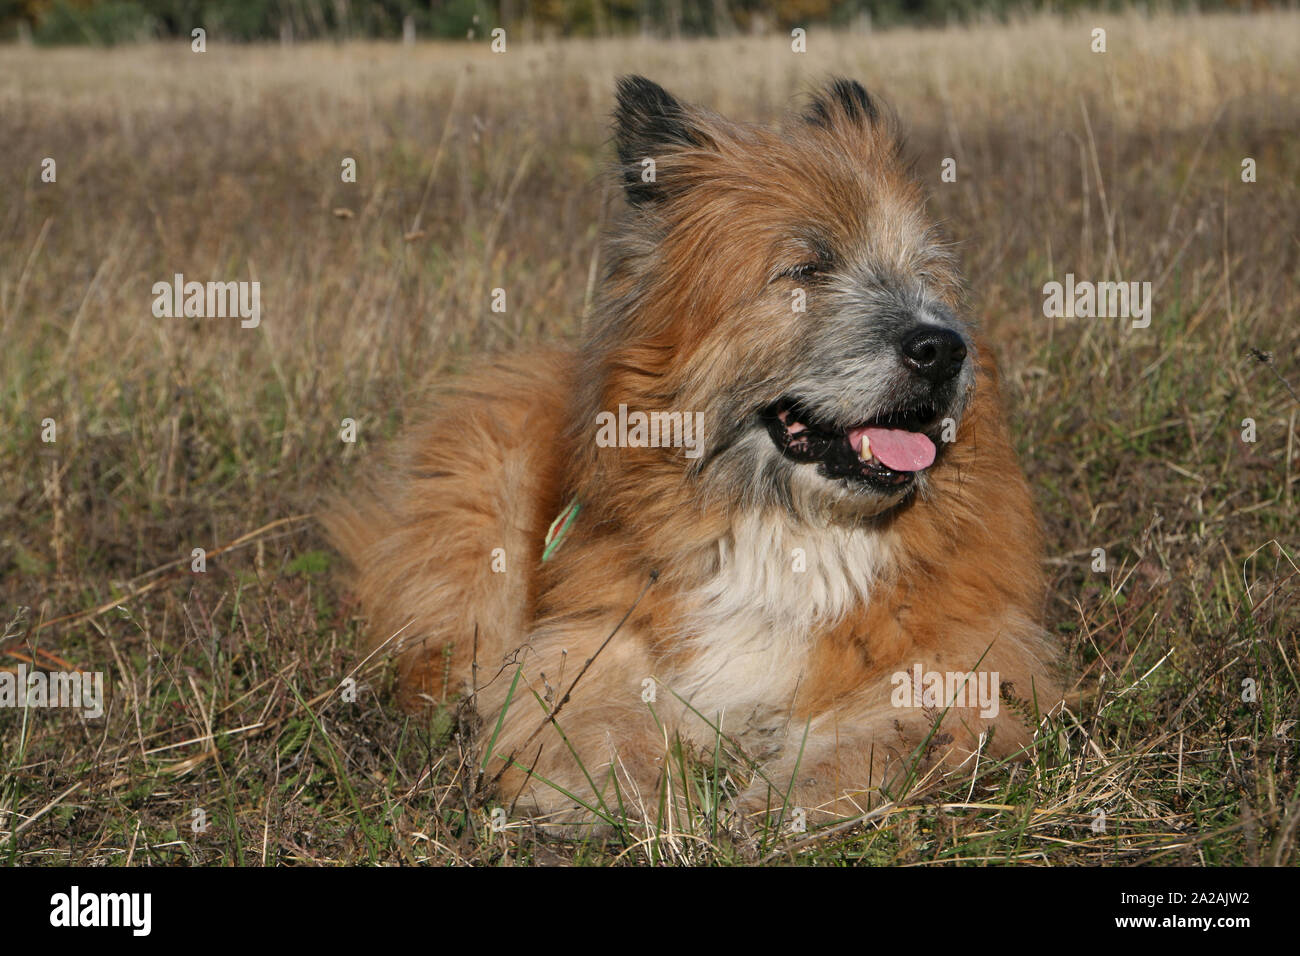 Hunde High Resolution Stock Photography and Images - Alamy